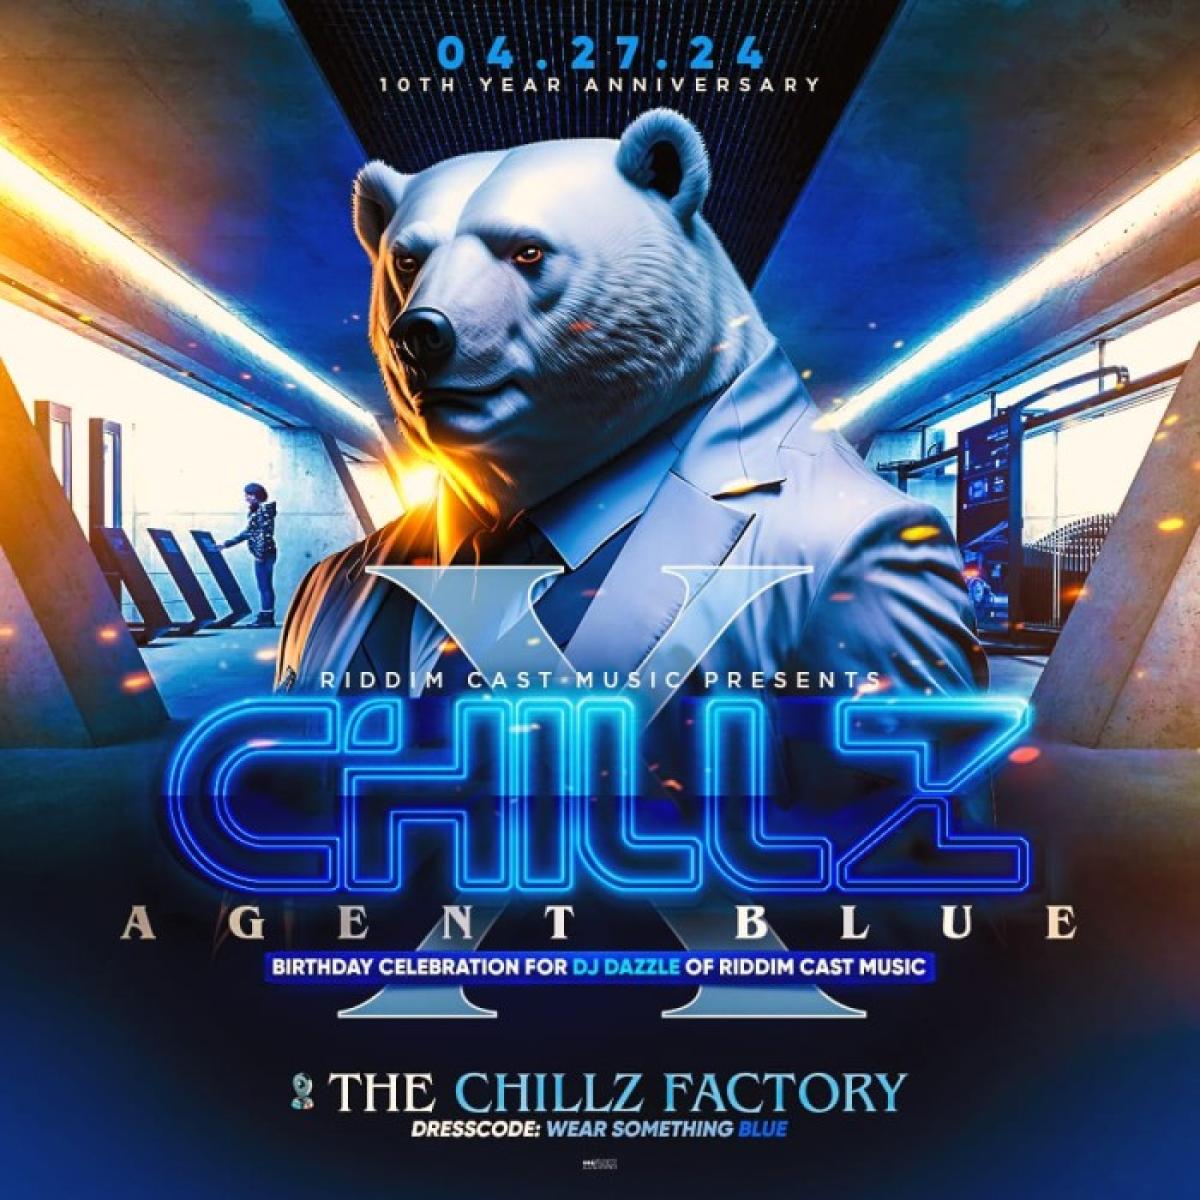 Chillz X : Agent Blue flyer or graphic.